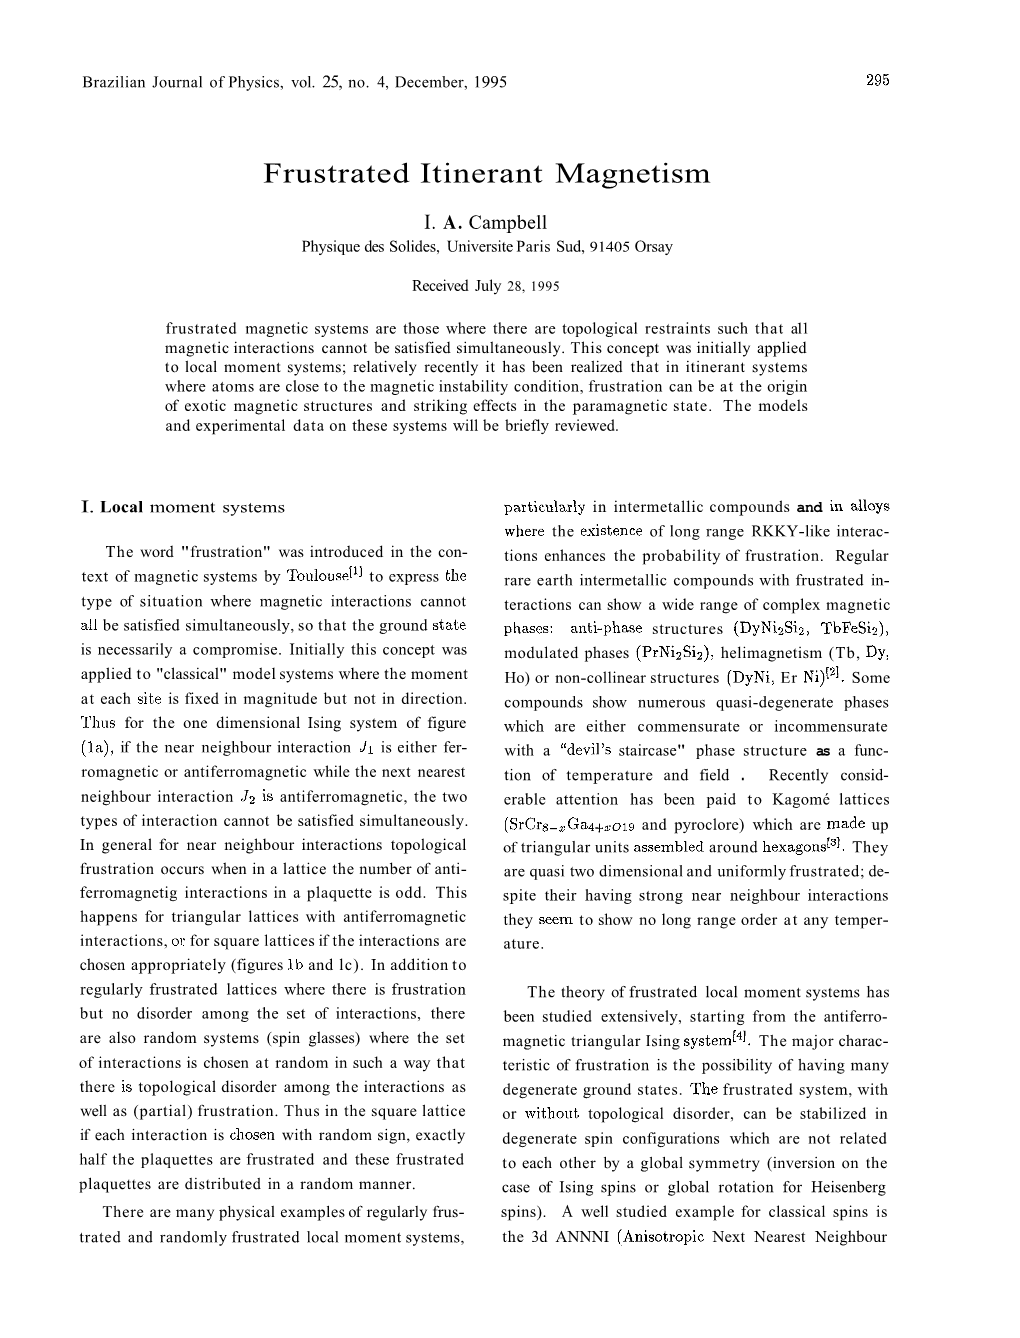 Frustrated Itinerant Magnetism